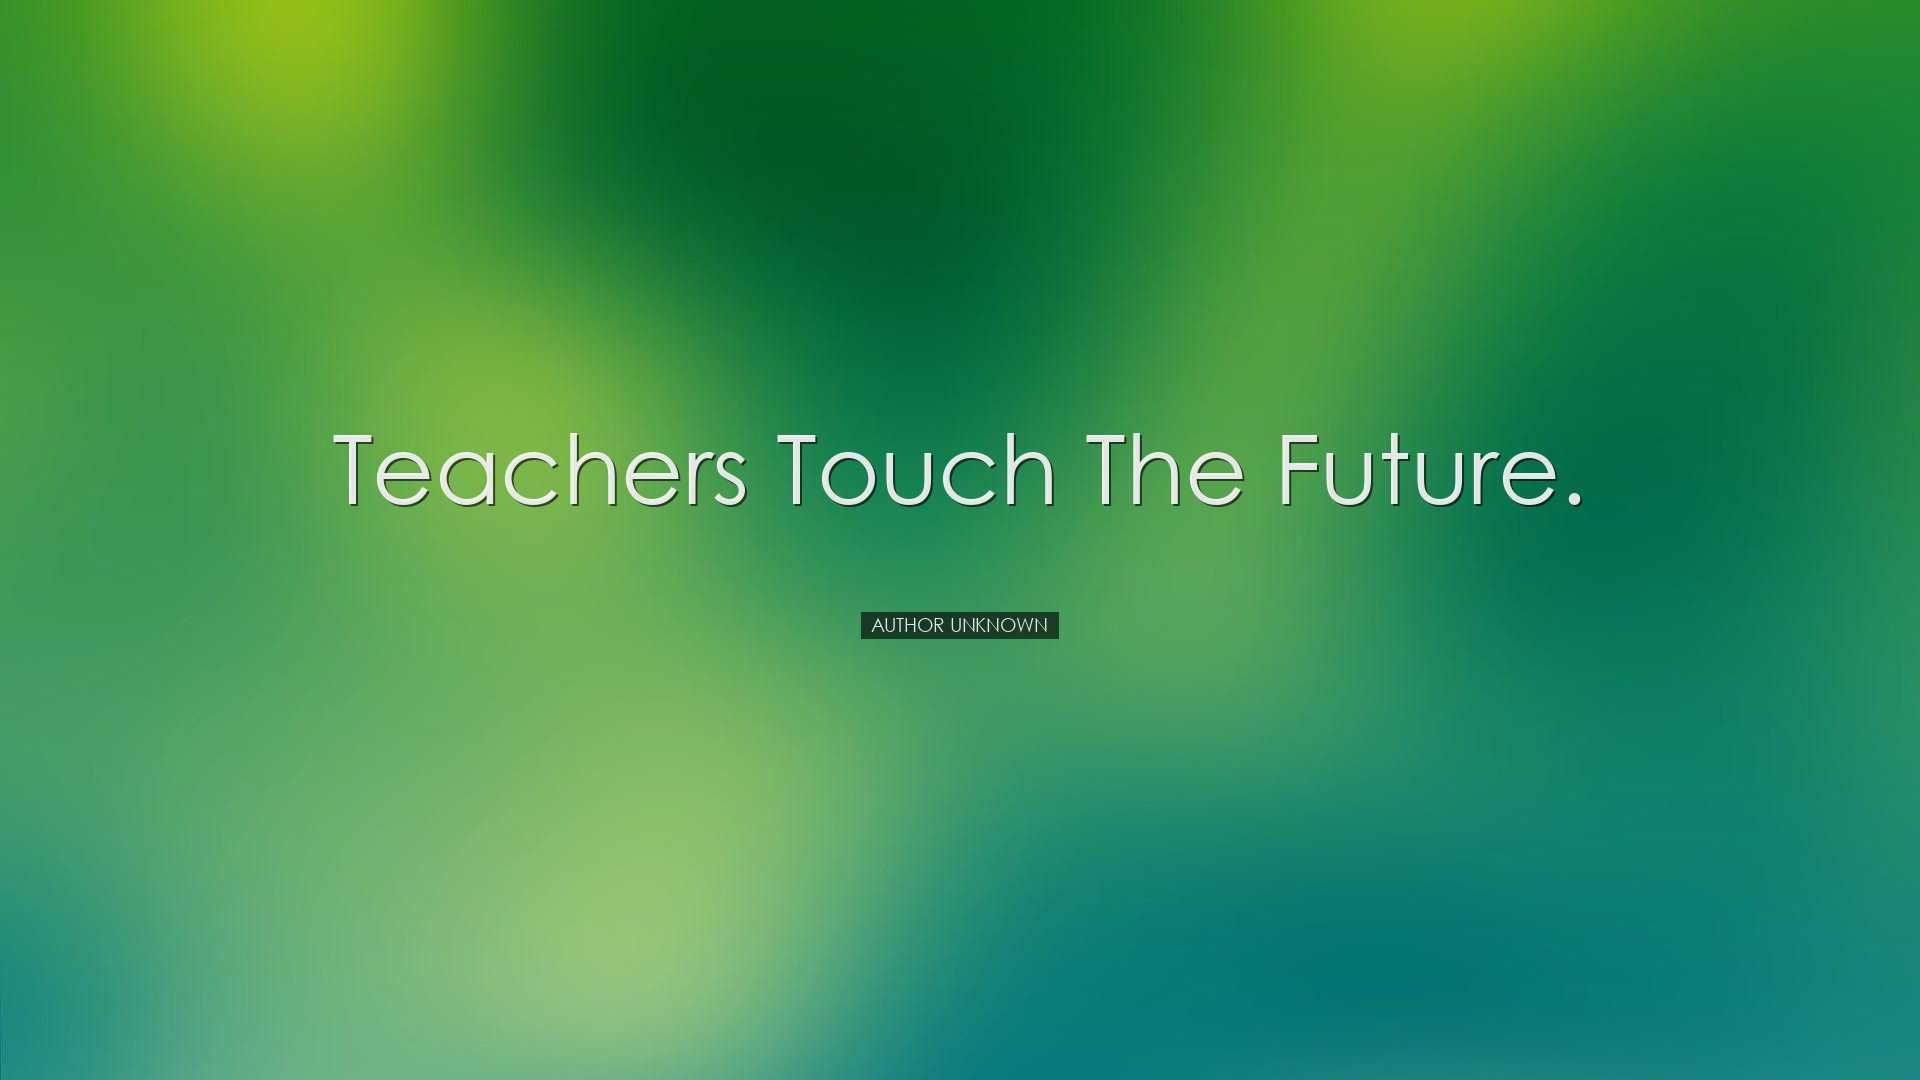 Teachers touch the future. - Author Unknown